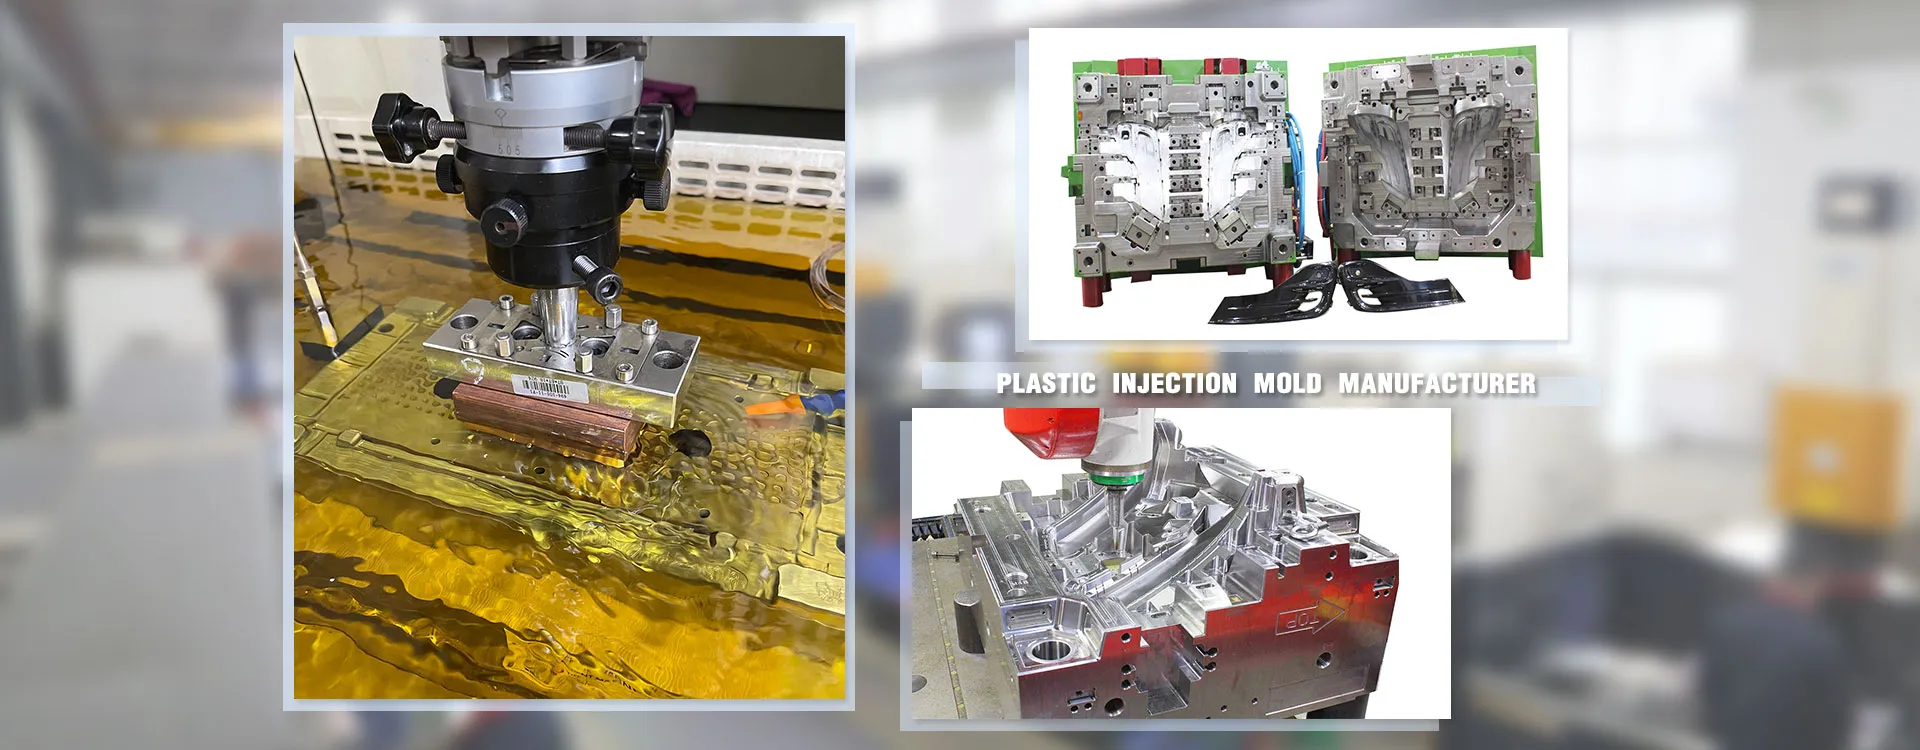 China Plastic Injection Mold Manufacturers